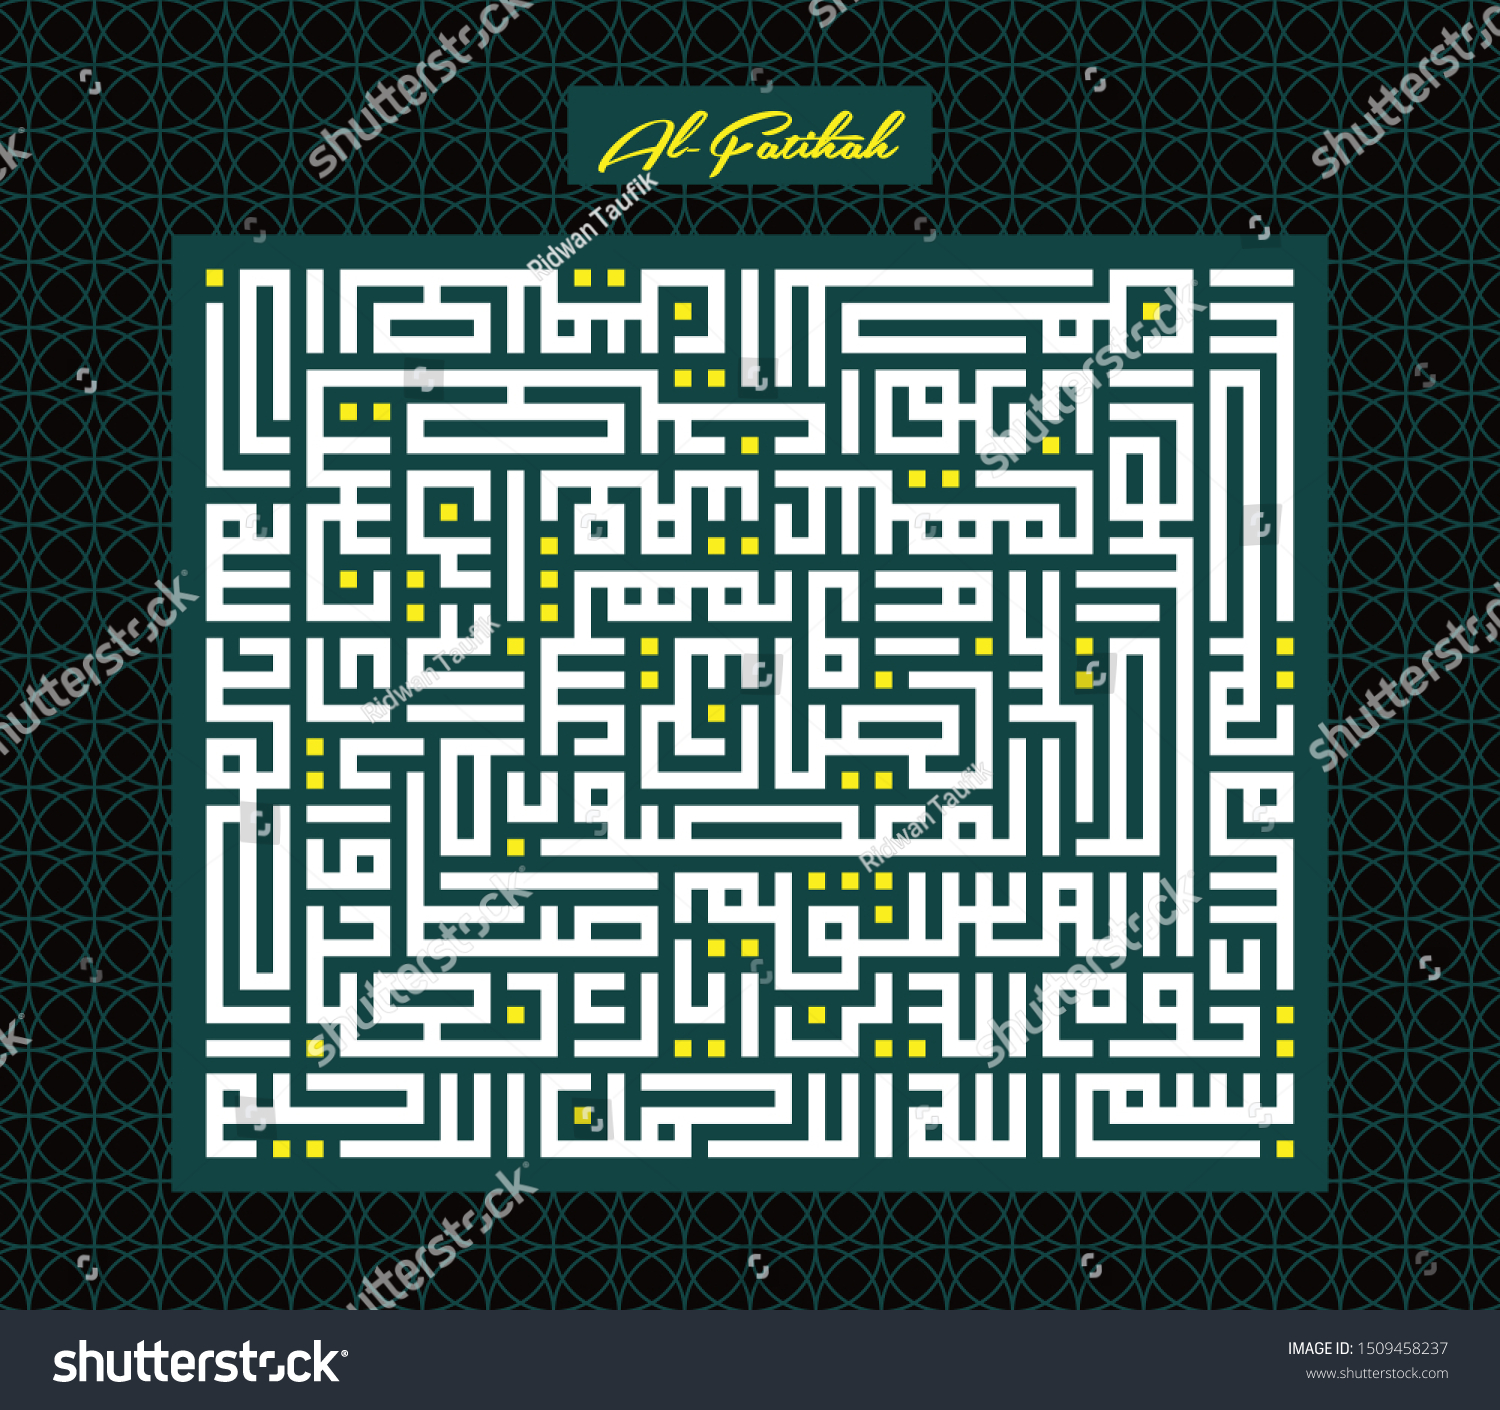 SVG of Arabic Kufi Square Calligraphy from the Noble Quran Surah al Fatiha/Fatihah (The Opening/The Opener). Muslim always read it in every 5 times prayer and at least 17 times a day svg